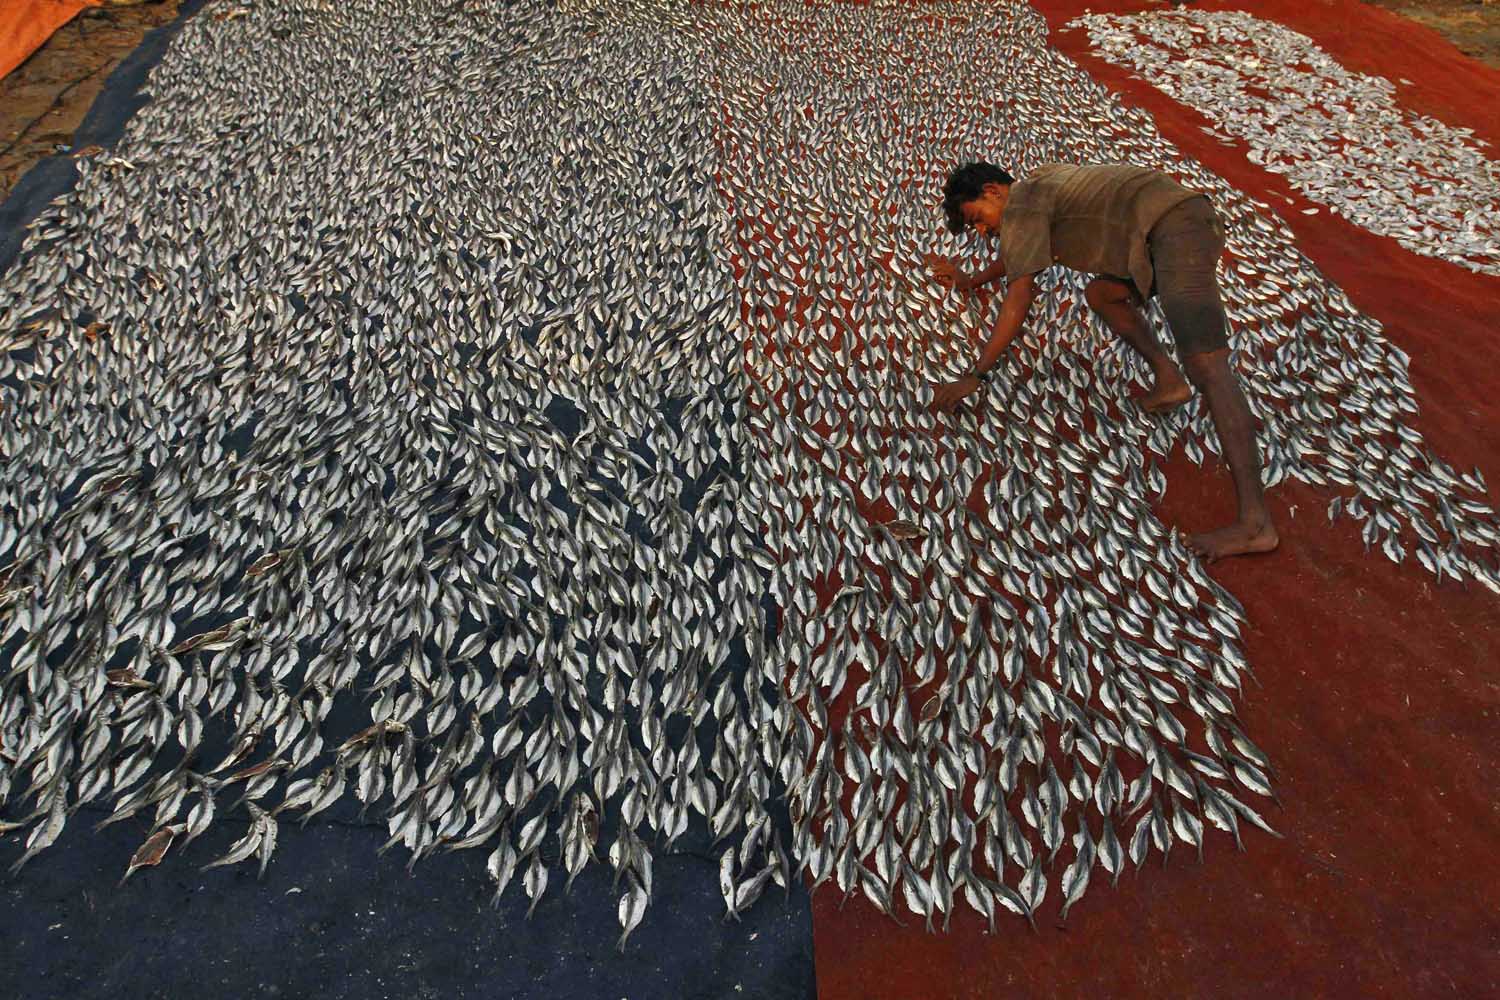 A fisherman arranges fishes kept for drying at a fishing harbour in Chennai